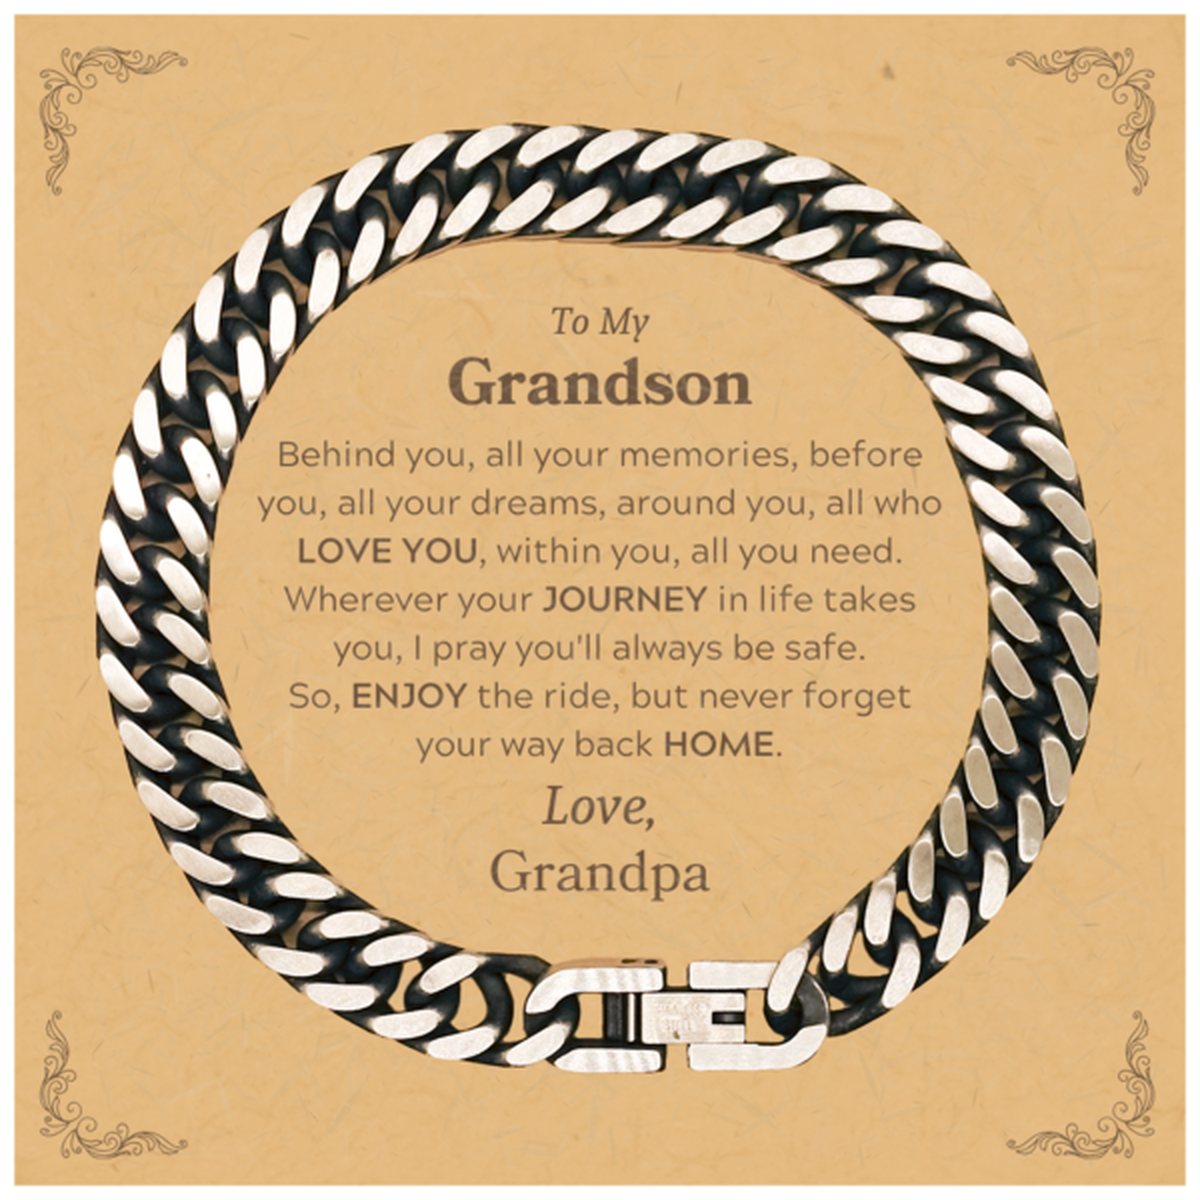 To My Grandson Graduation Gifts from Grandpa, Grandson Cuban Link Chain Bracelet Christmas Birthday Gifts for Grandson Behind you, all your memories, before you, all your dreams. Love, Grandpa